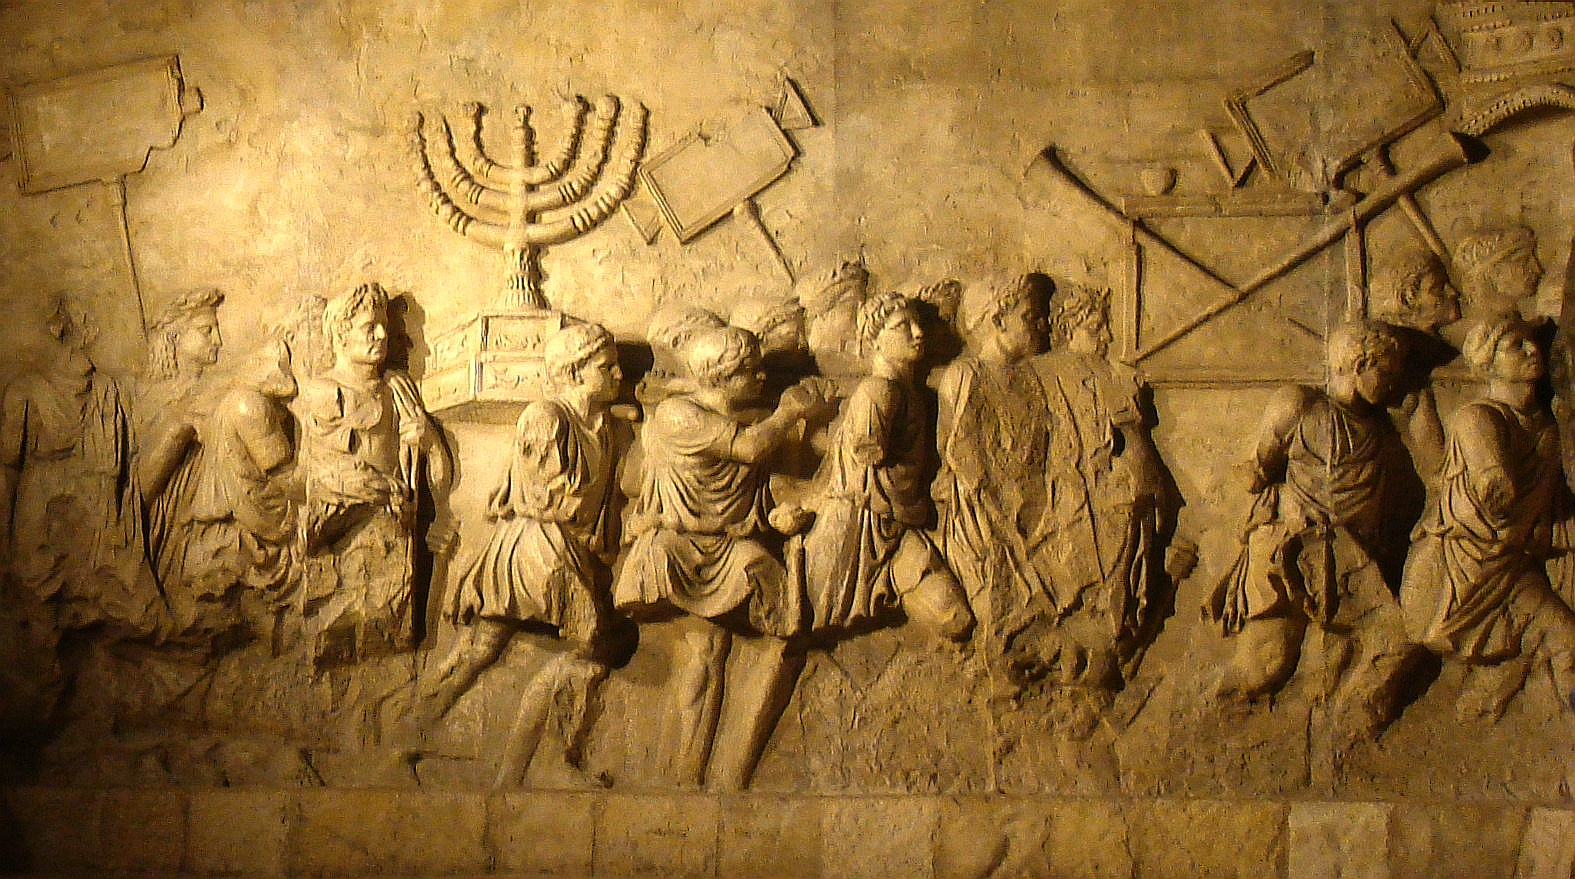 The Arch of Titus is a 1st-century AD honorific arch. The arch contains panels depicting the triumphal procession celebrated in 71 AD after the Roman victory culminating in the fall of Jerusalem. It became a symbol of the Jewish Diaspora,